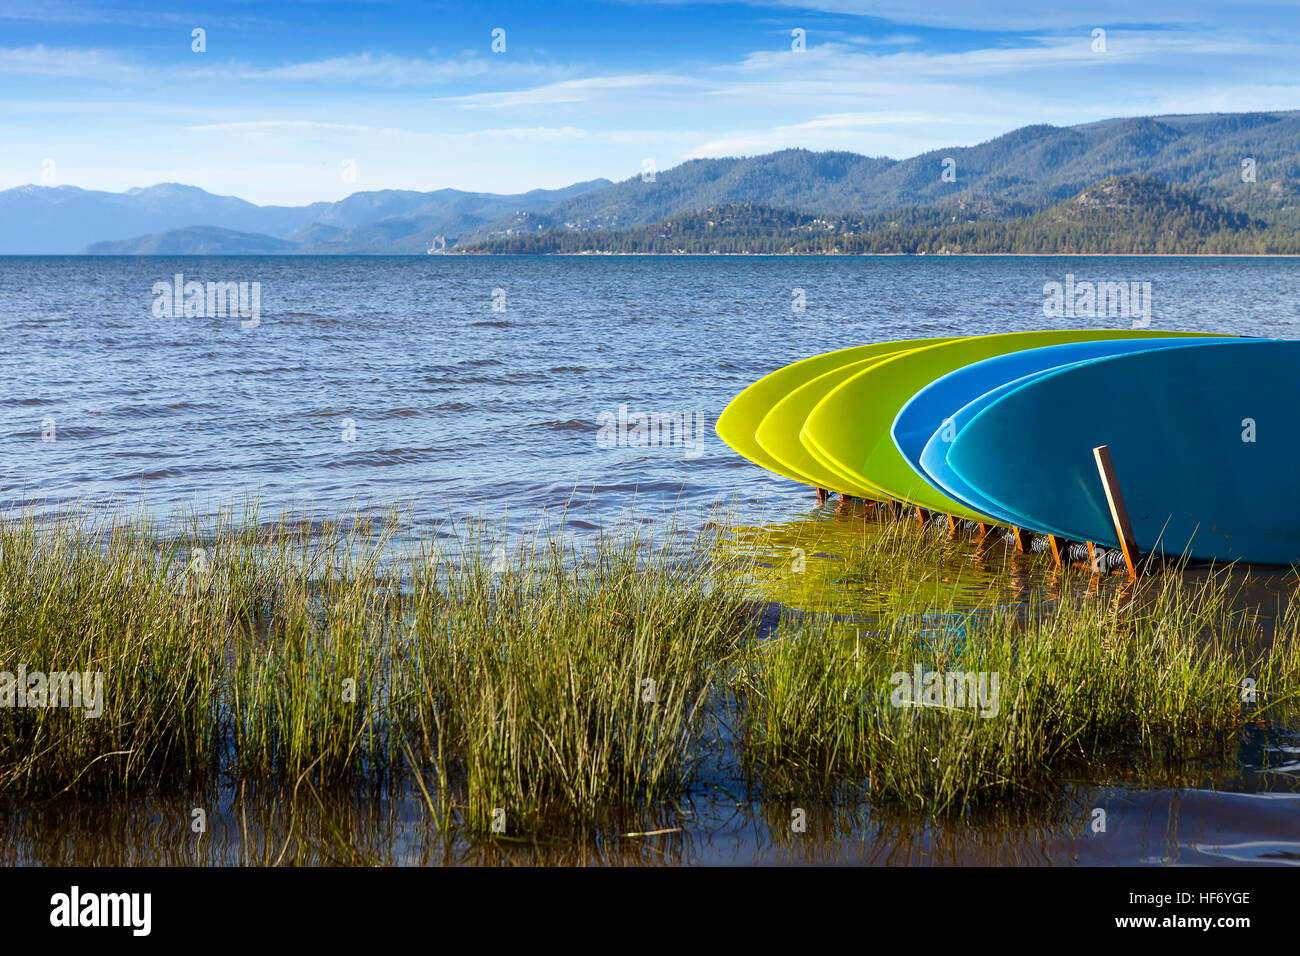 Rental Stand Up Paddle boards on shore of Lake Tahoe, California. Stock Photo